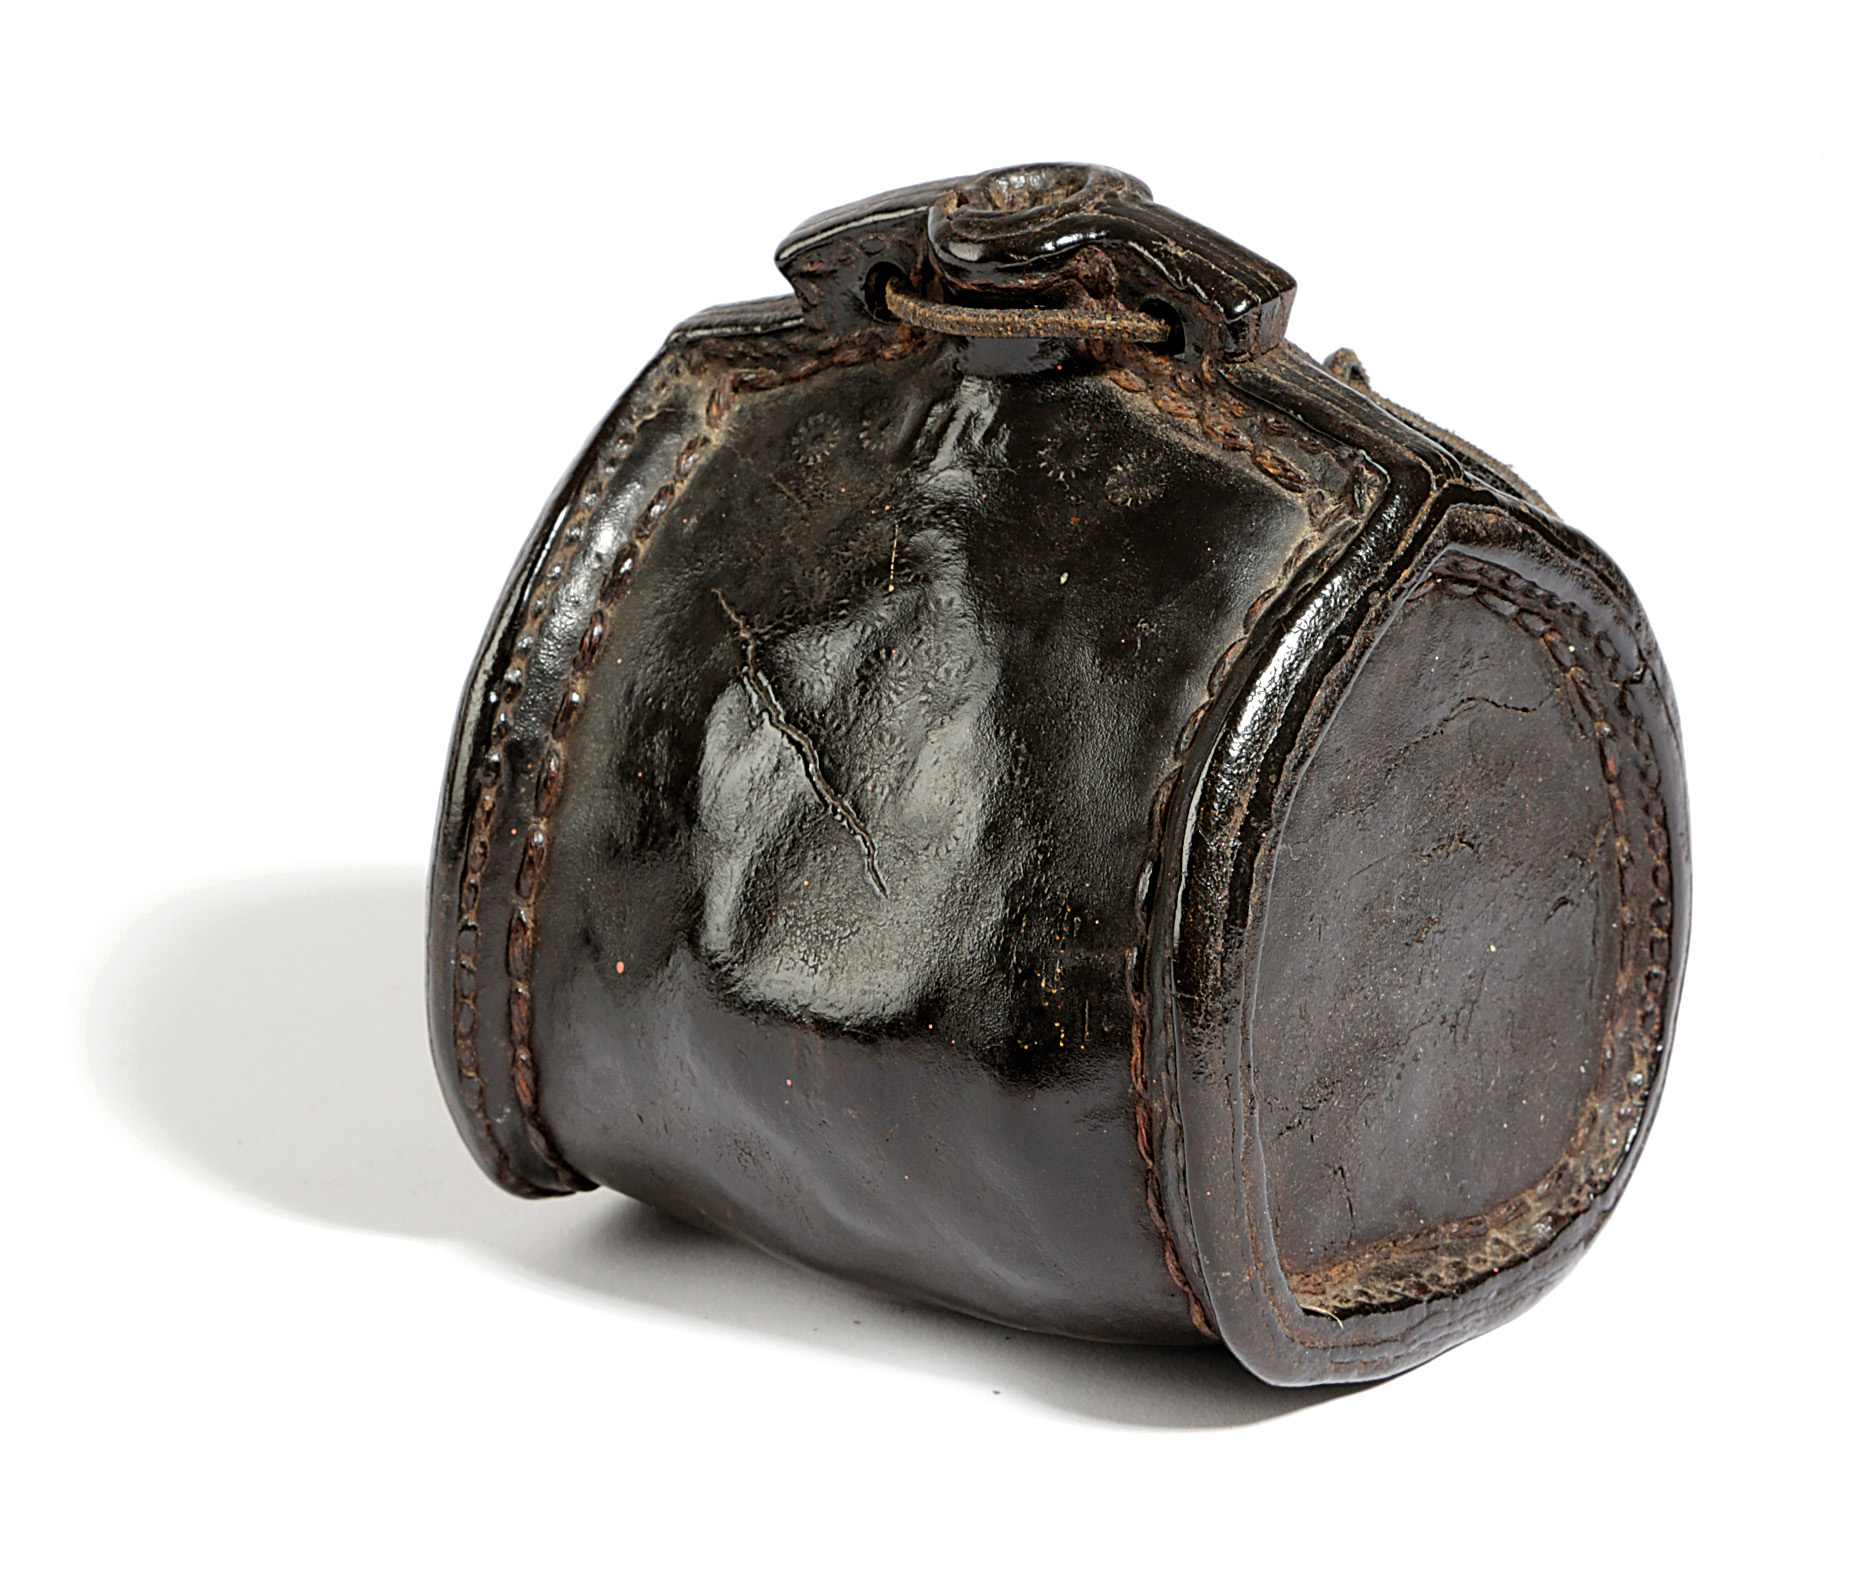 A LEATHER COSTREL LATE 17TH / EARLY 18TH CENTURY of shouldered form, with an open spout, pierced